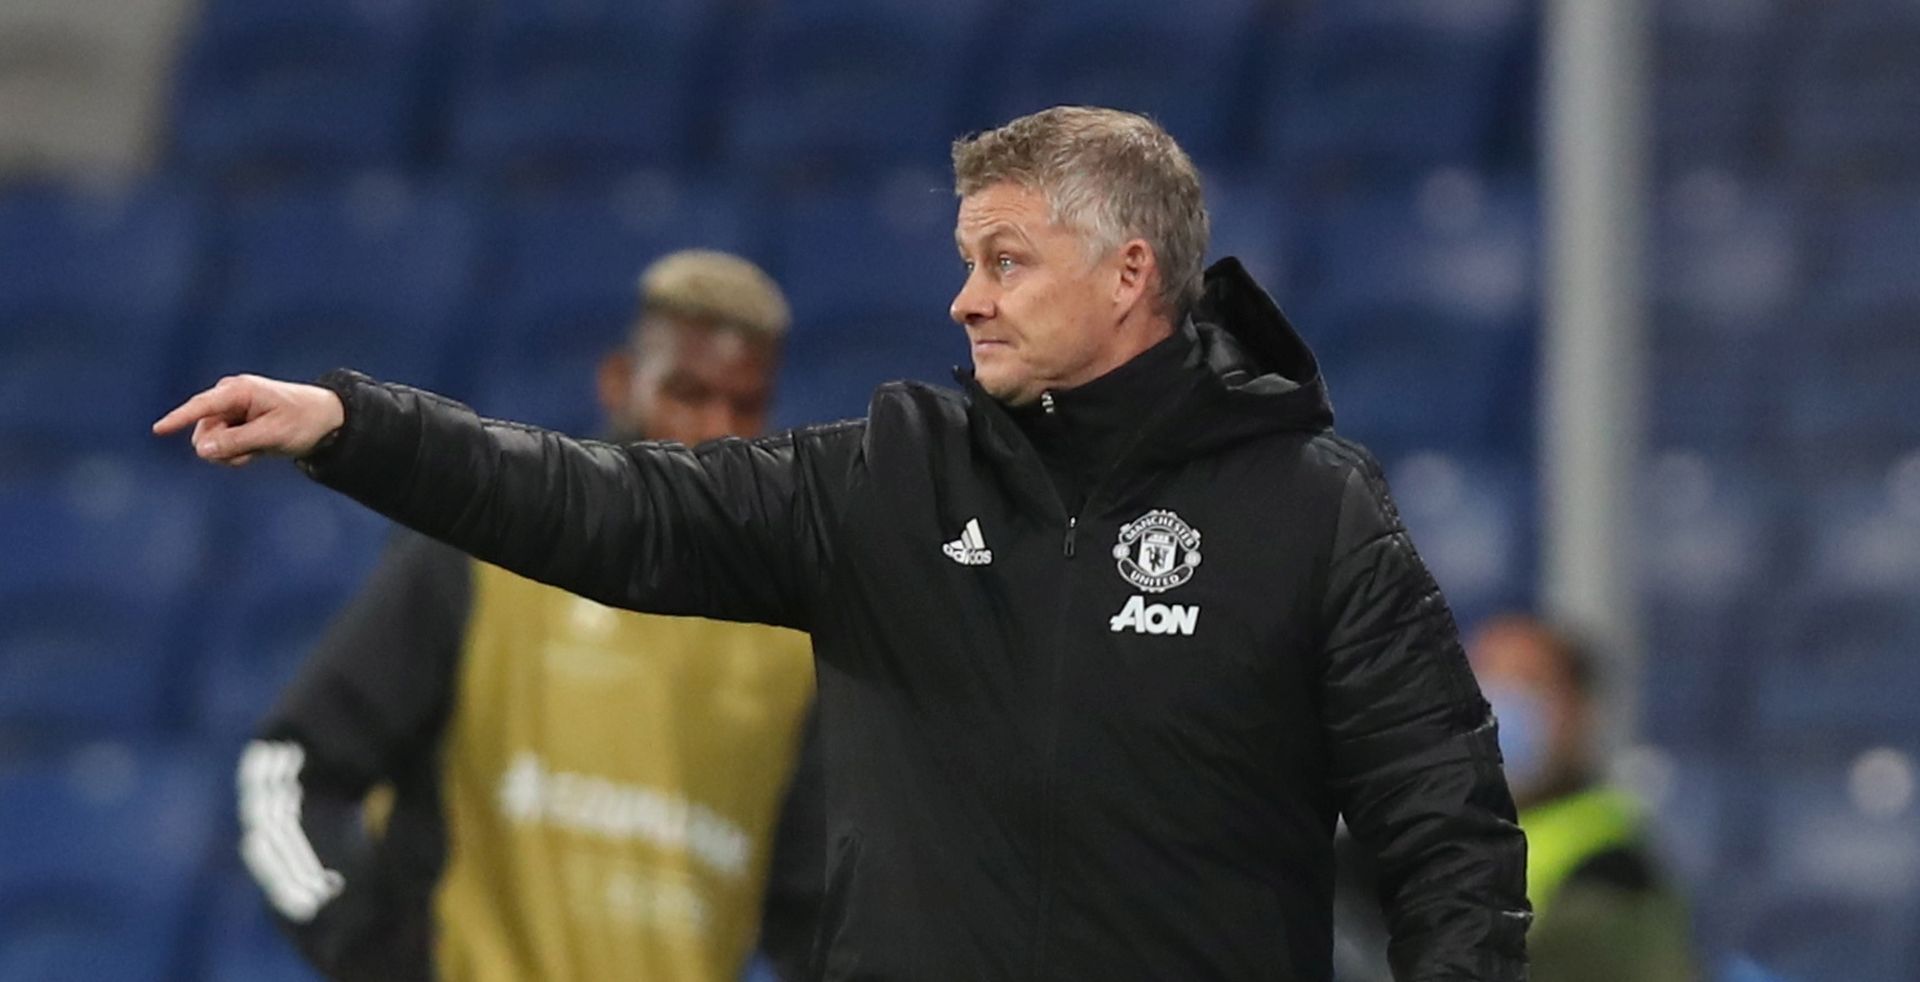 epa08798945 Manchester United's manager Ole Gunnar Solskjaer reacts during the UEFA Champions League group H soccer match between Istanbul Basaksehir and Manchester United in Istanbul, Turkey, 04 November 2020.  EPA/Tolga Bozoglu